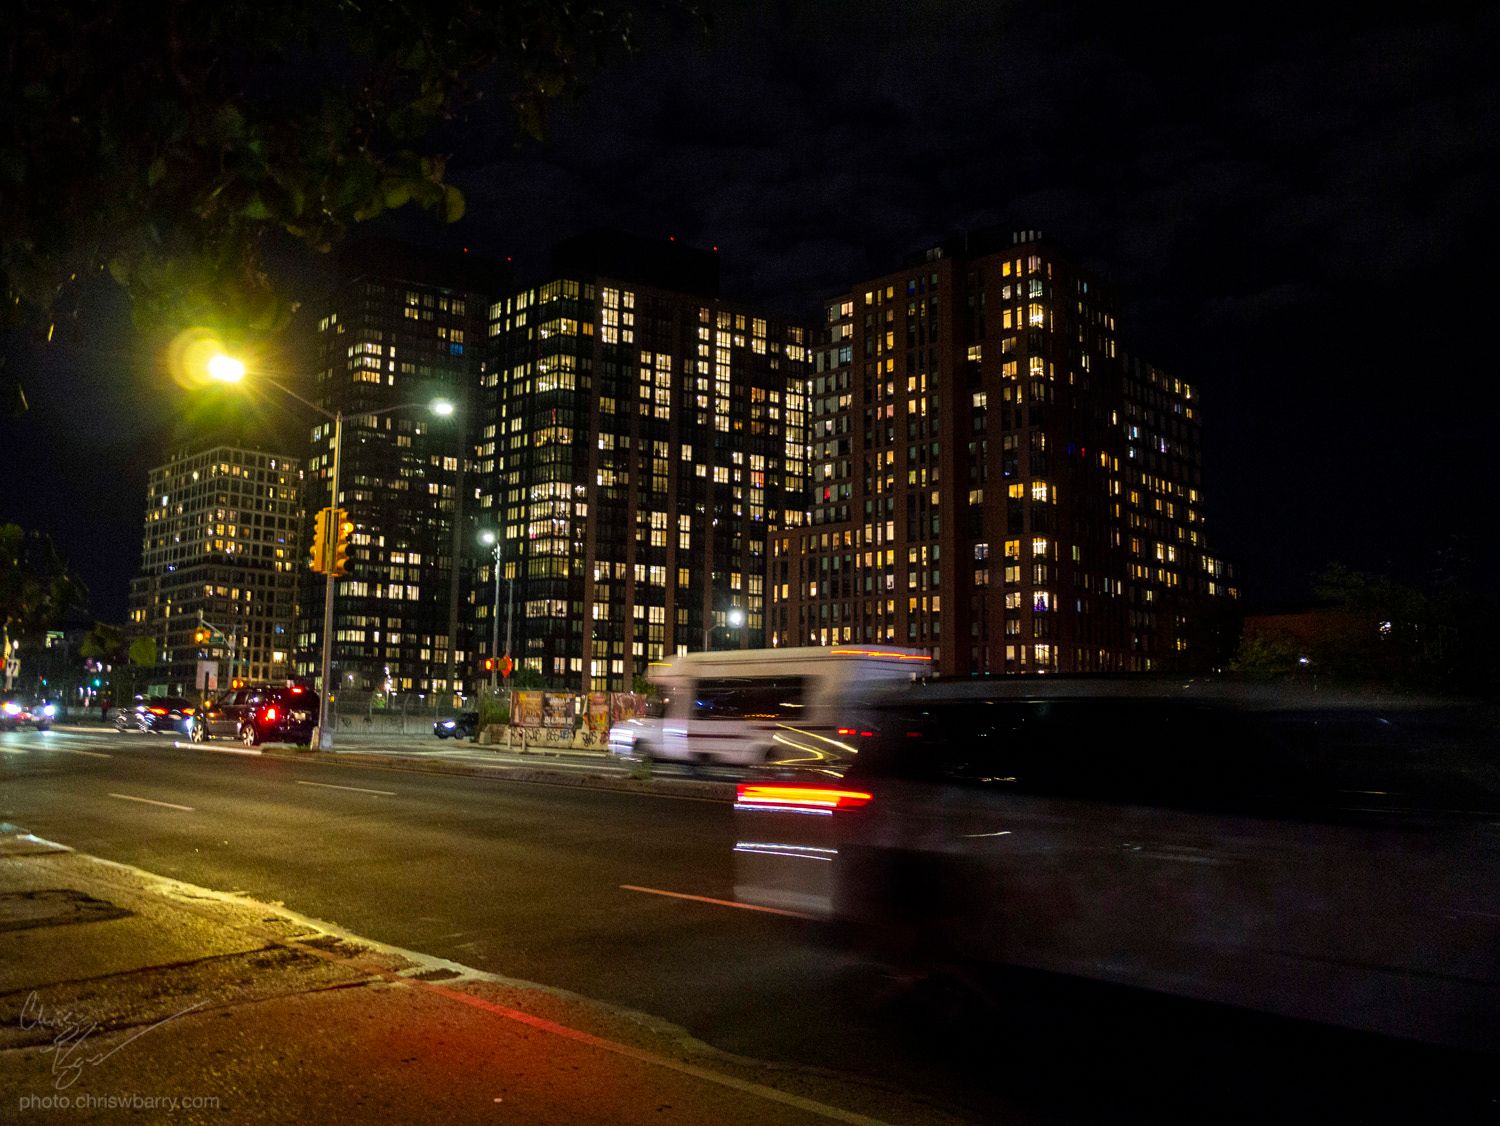 A very yellow hued photograph of a street at night, where moving cars are slightly blurred. Large blocky apartment buildings 